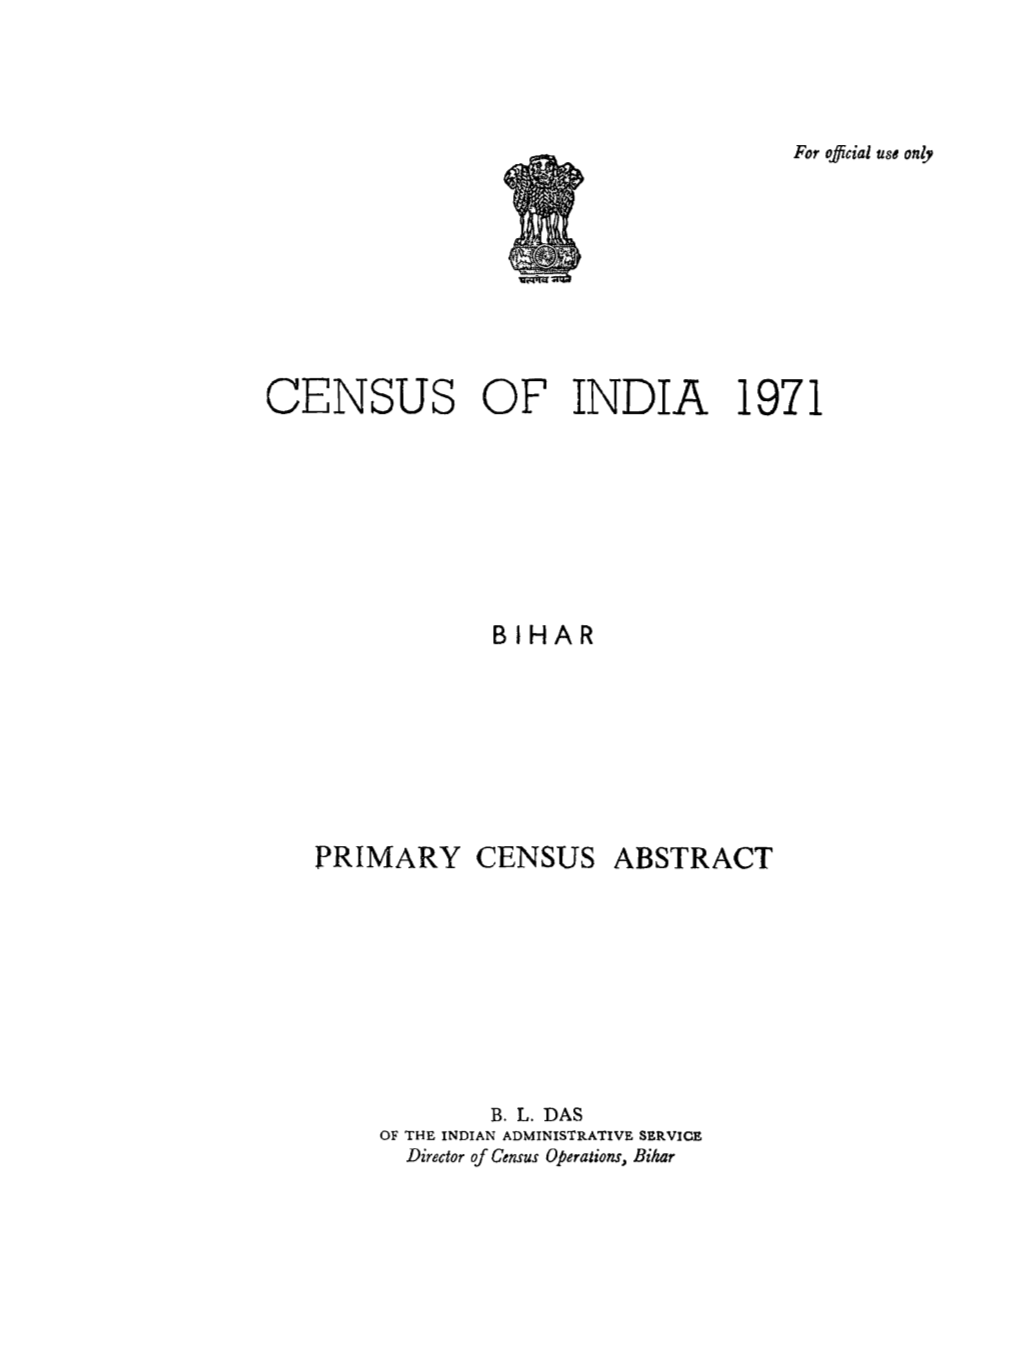 Primary Census Abstract, Bihar